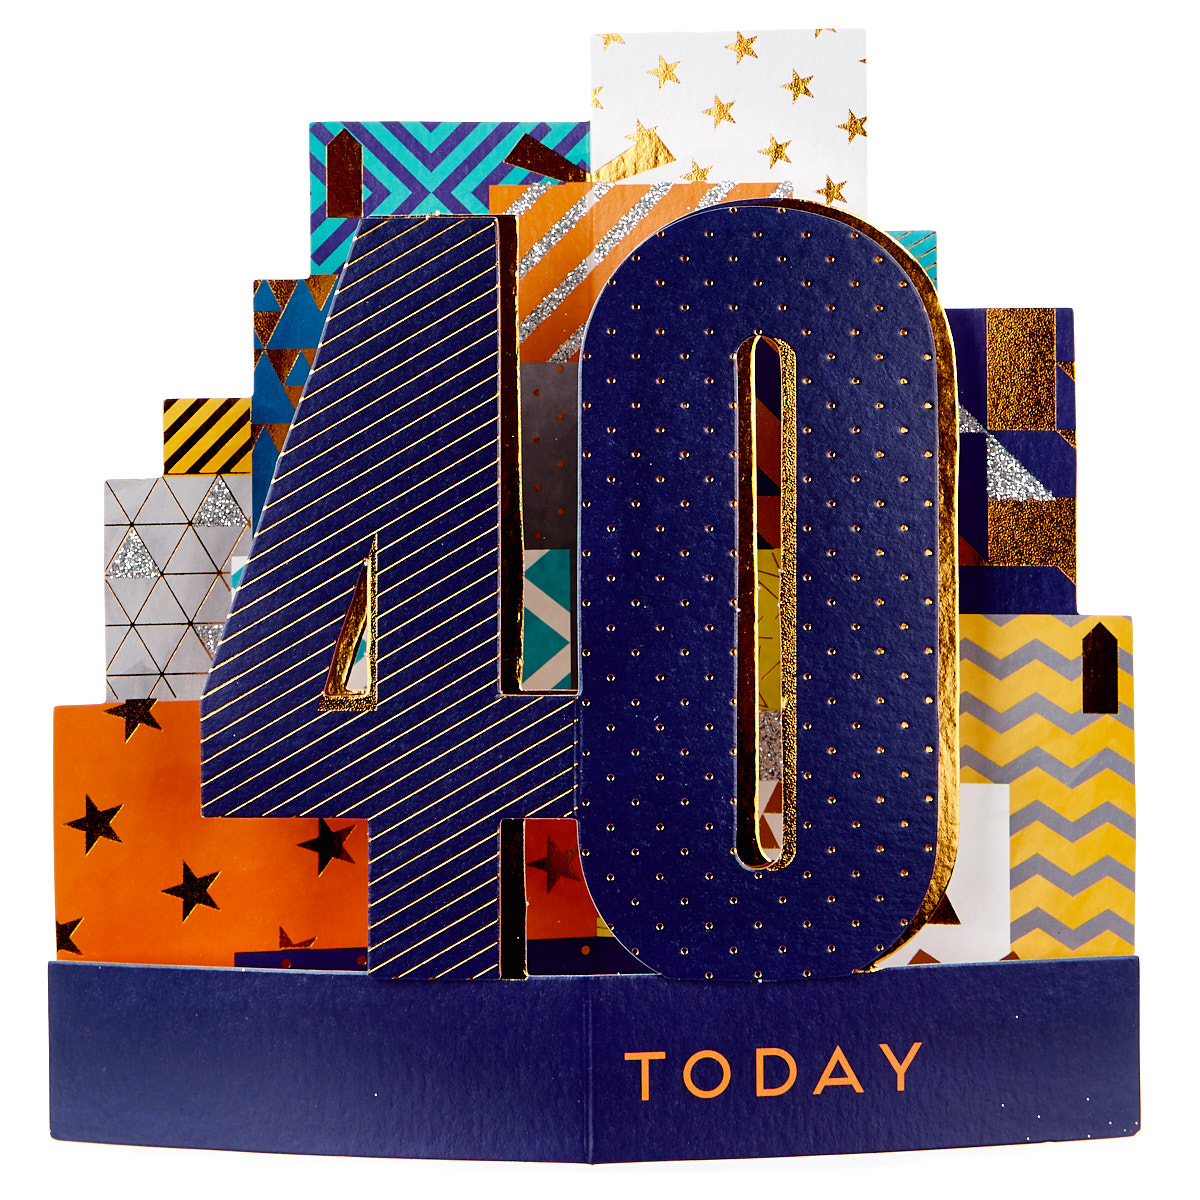 Exquisite Collection 3D 40th Birthday Card